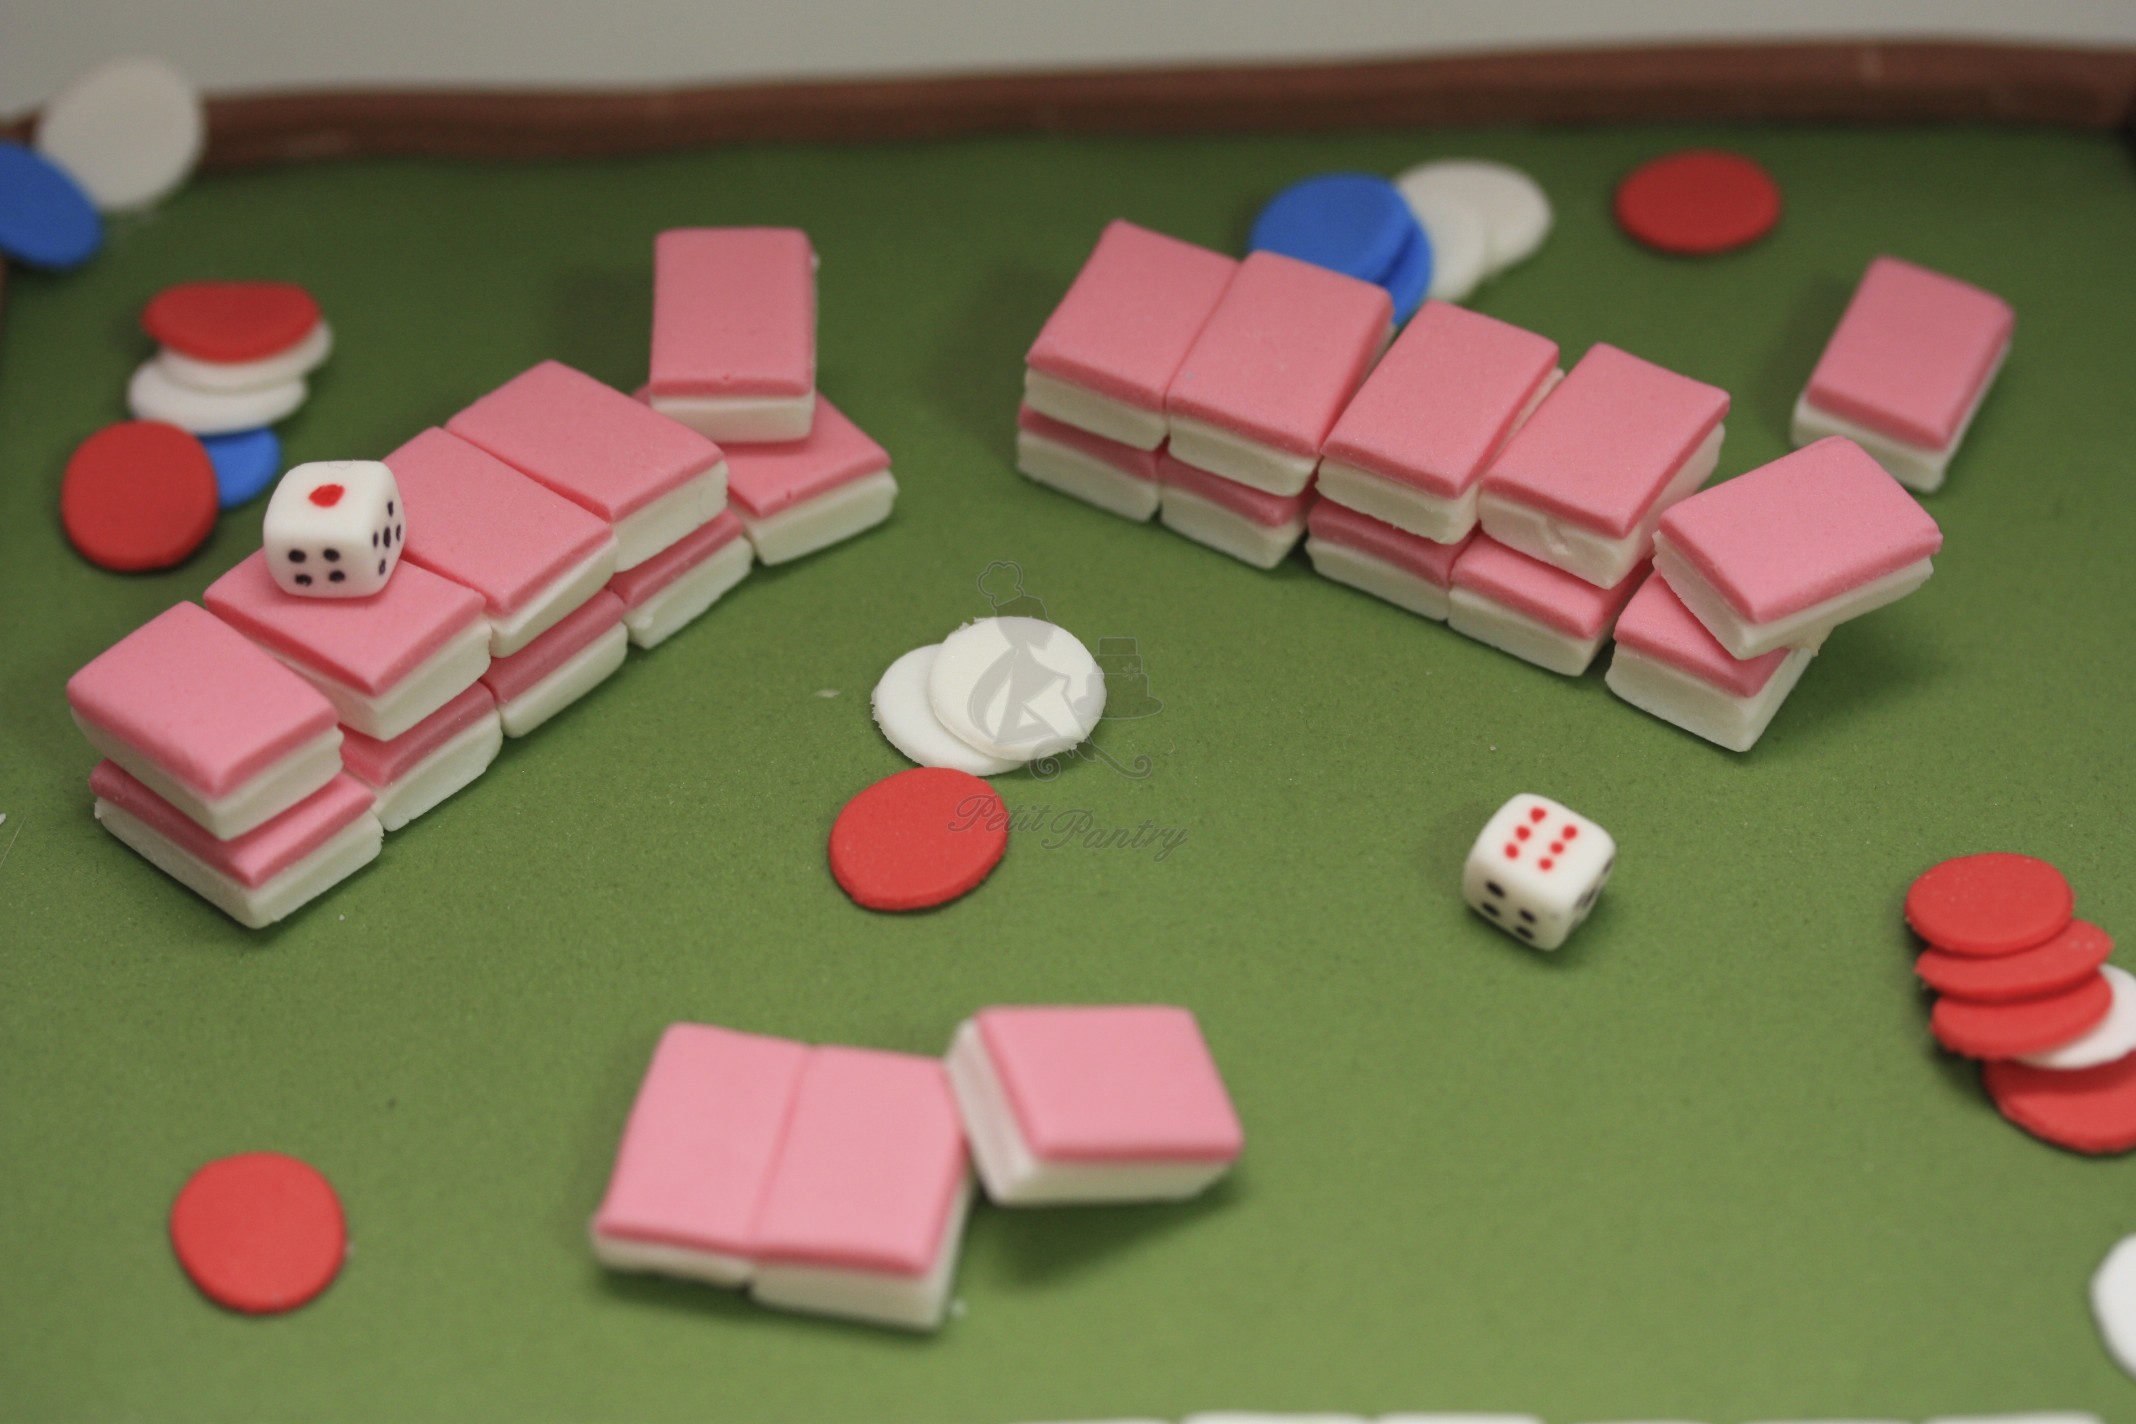 Up Your Game With These Opulent Mahjong Sets